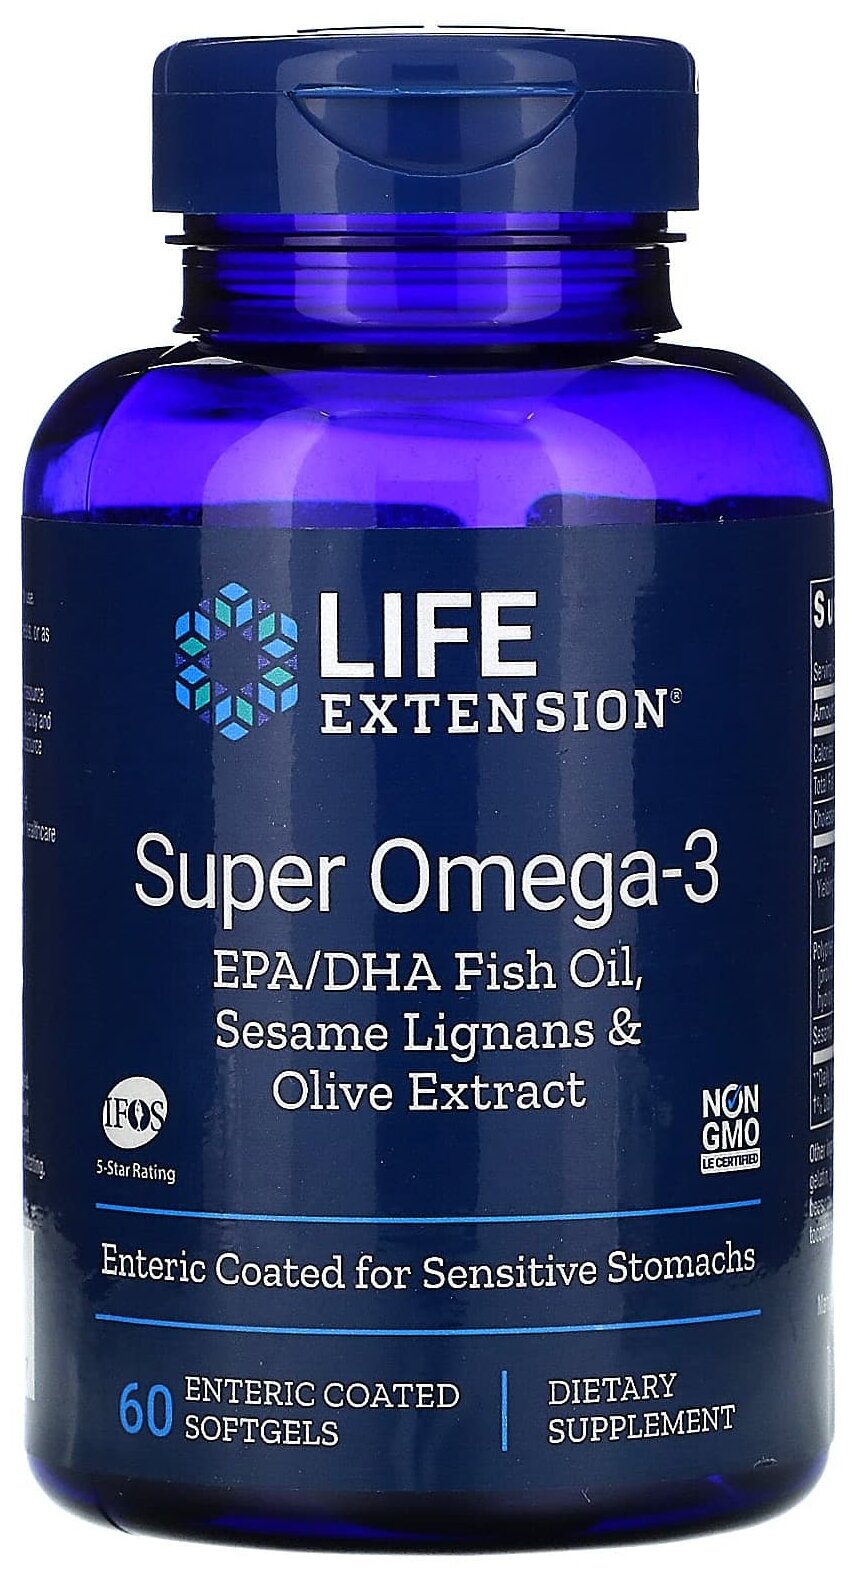 Капсулы Life Extension Super Omega-3 EPA/DHA with Sesame Lignans & Olive Extract, 200 г, 60 шт.